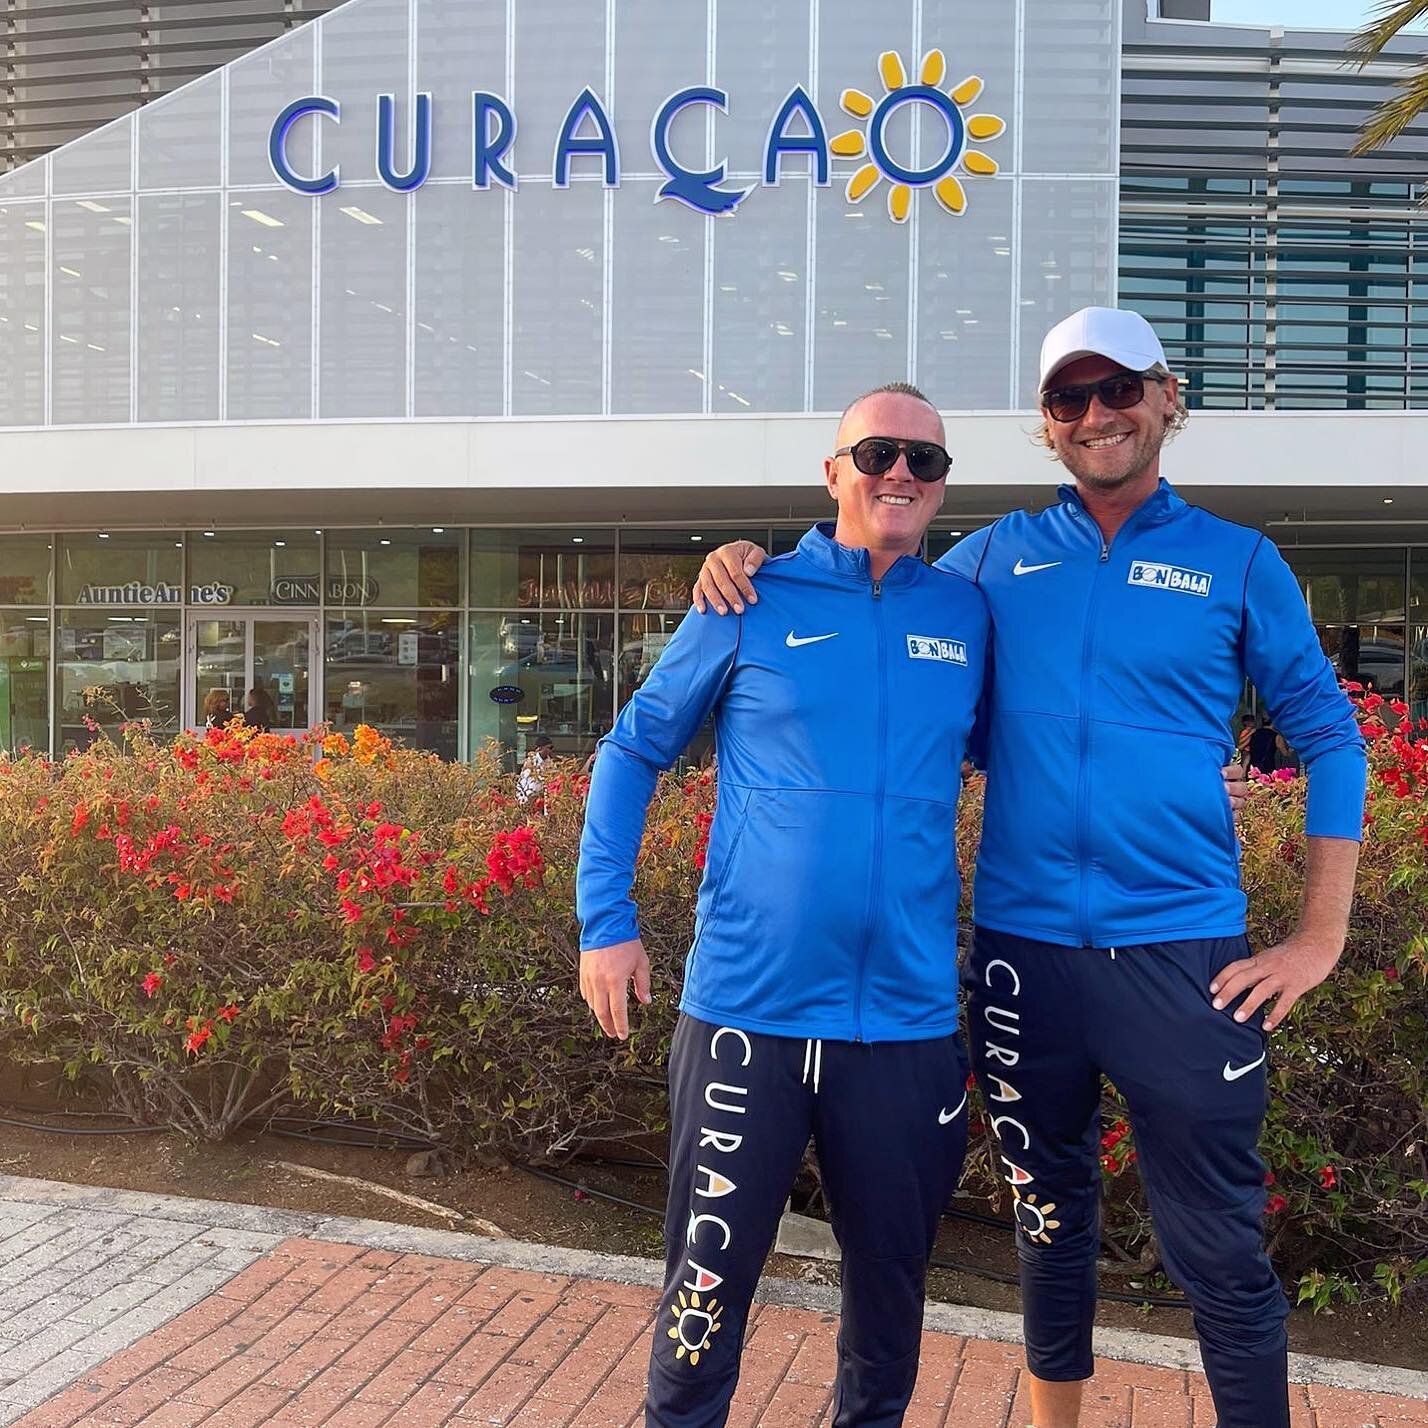 Coach Manu &amp; Coach Jori are off for their Beach Tennis ITF Tour in Europe! We wish you all the best of luck, go team #curacao 🇨🇼💪!! Follow their adventure on our socials!